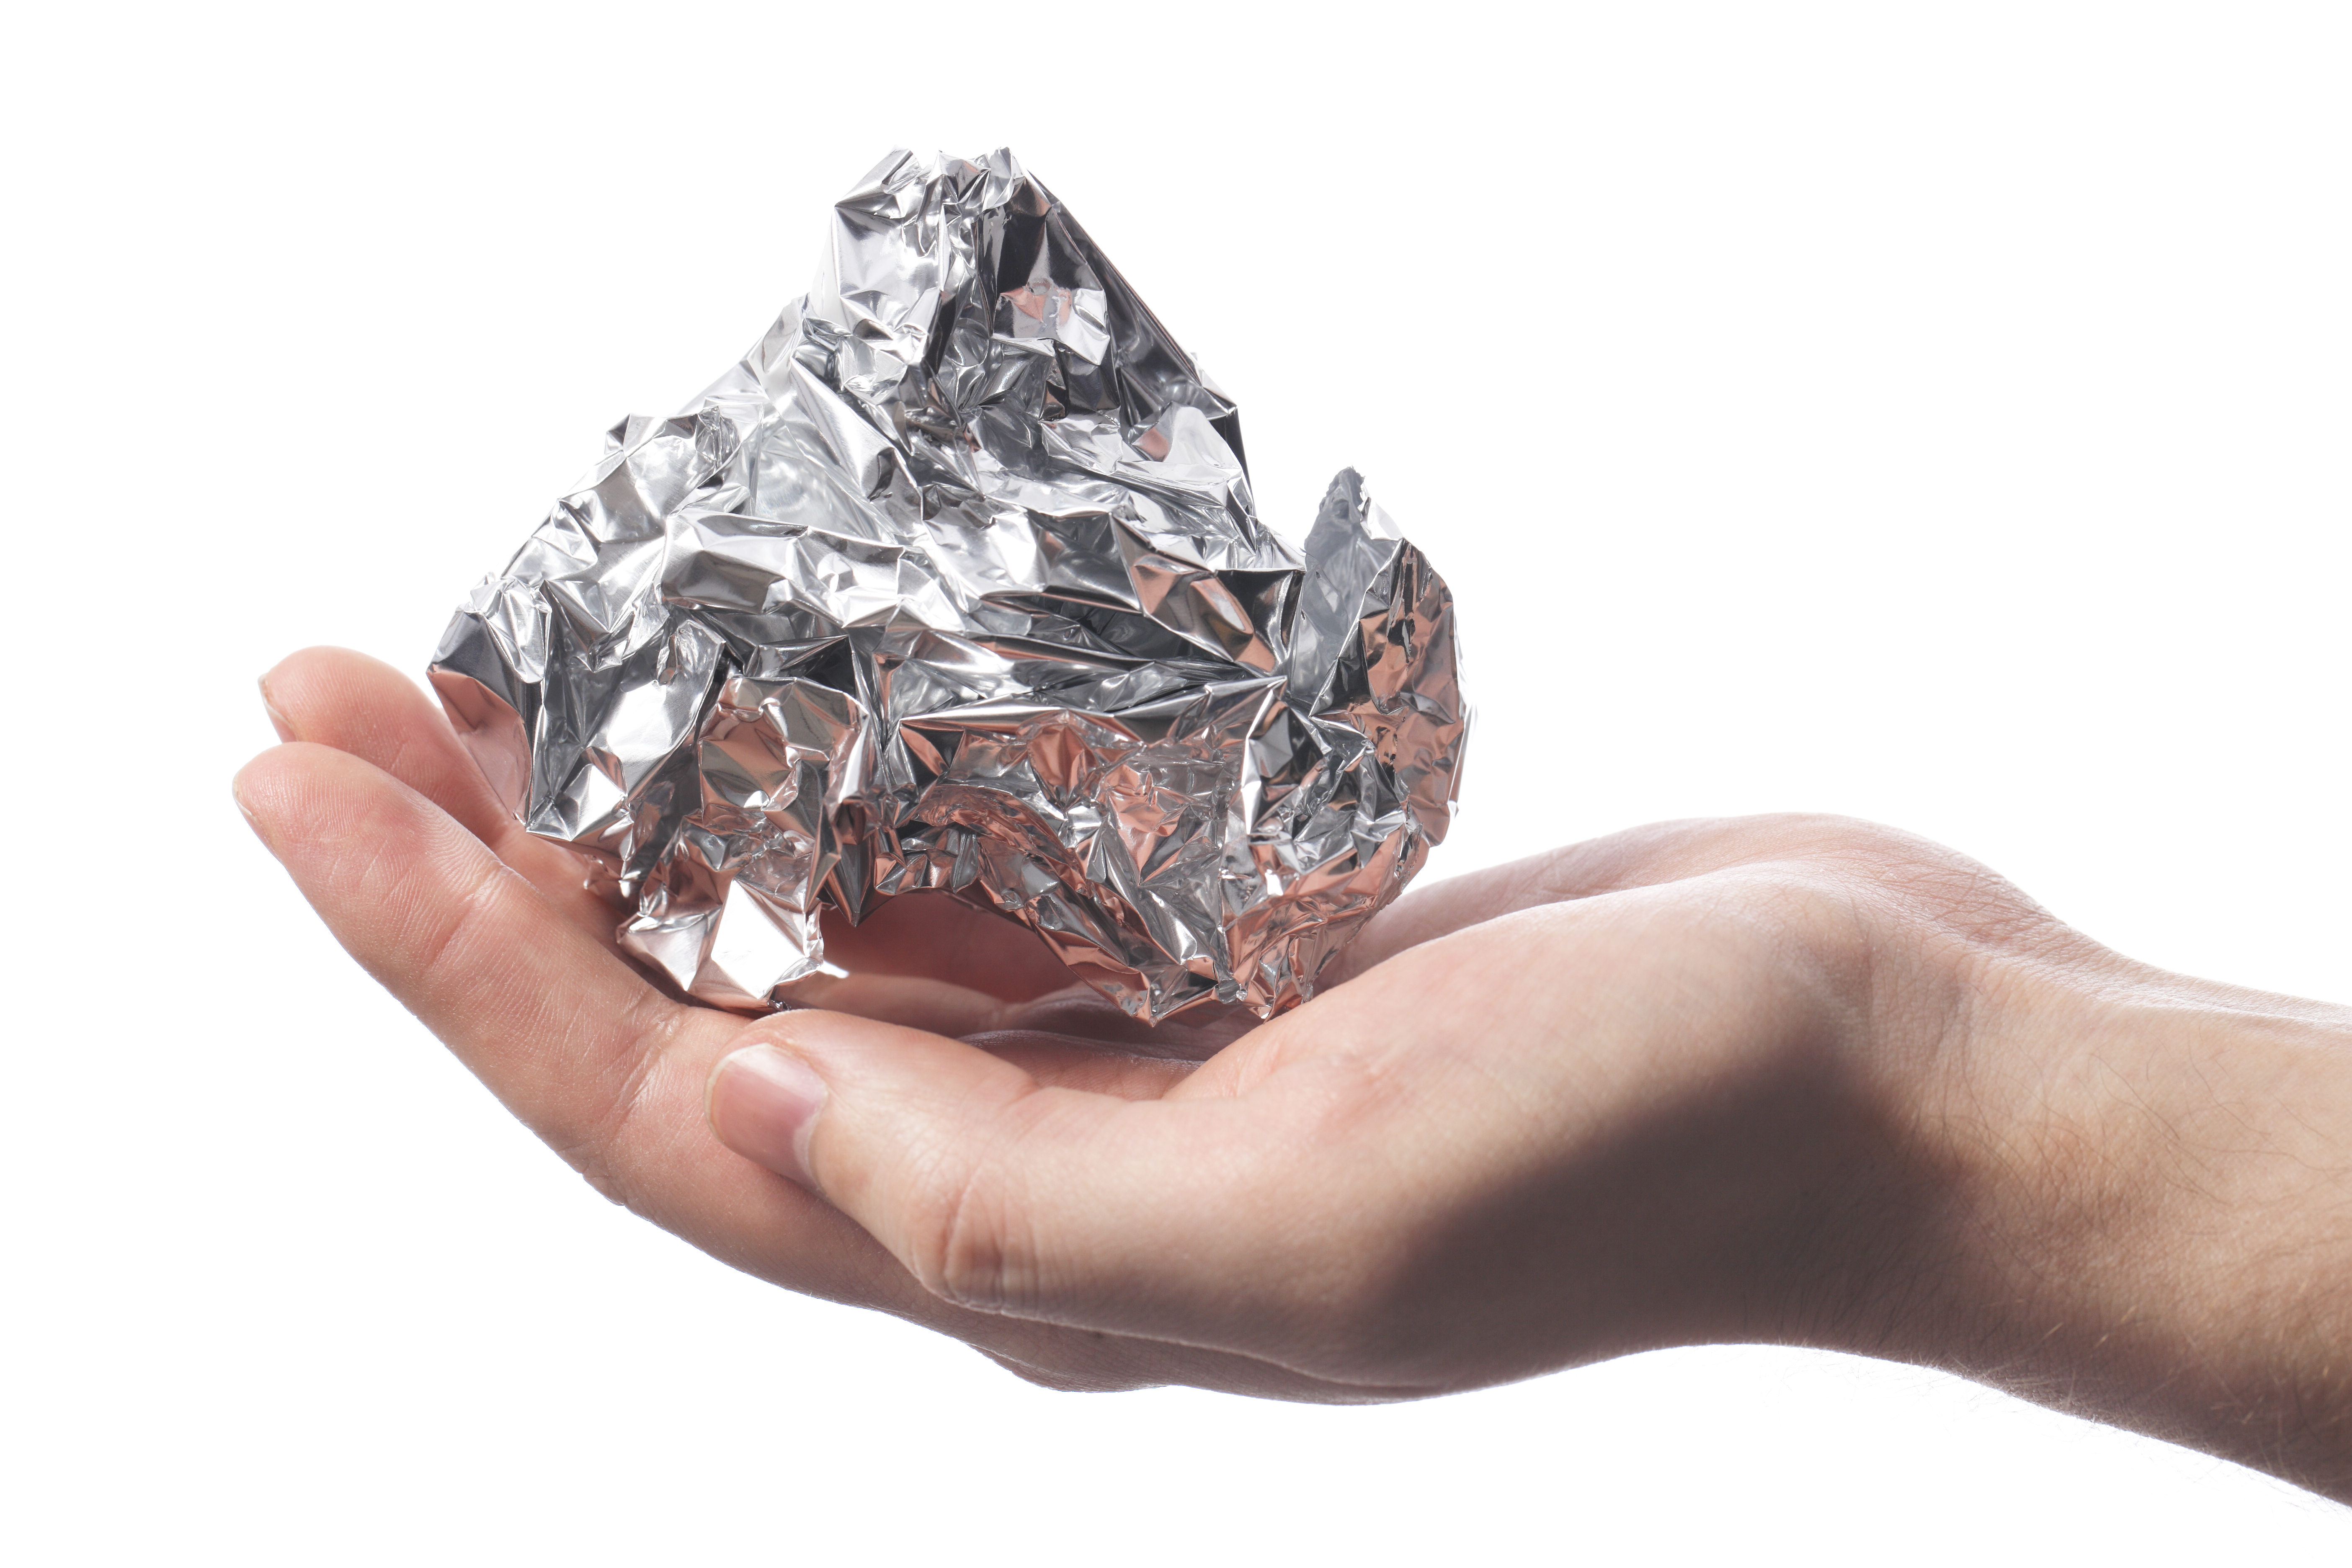 https://cityscoop.us/houstontx-recycling/files/2022/01/mission-recycle-Houston-TX-All-You-Need-to-Know-About-Commercial-Aluminum-Foil-Recycling.jpg